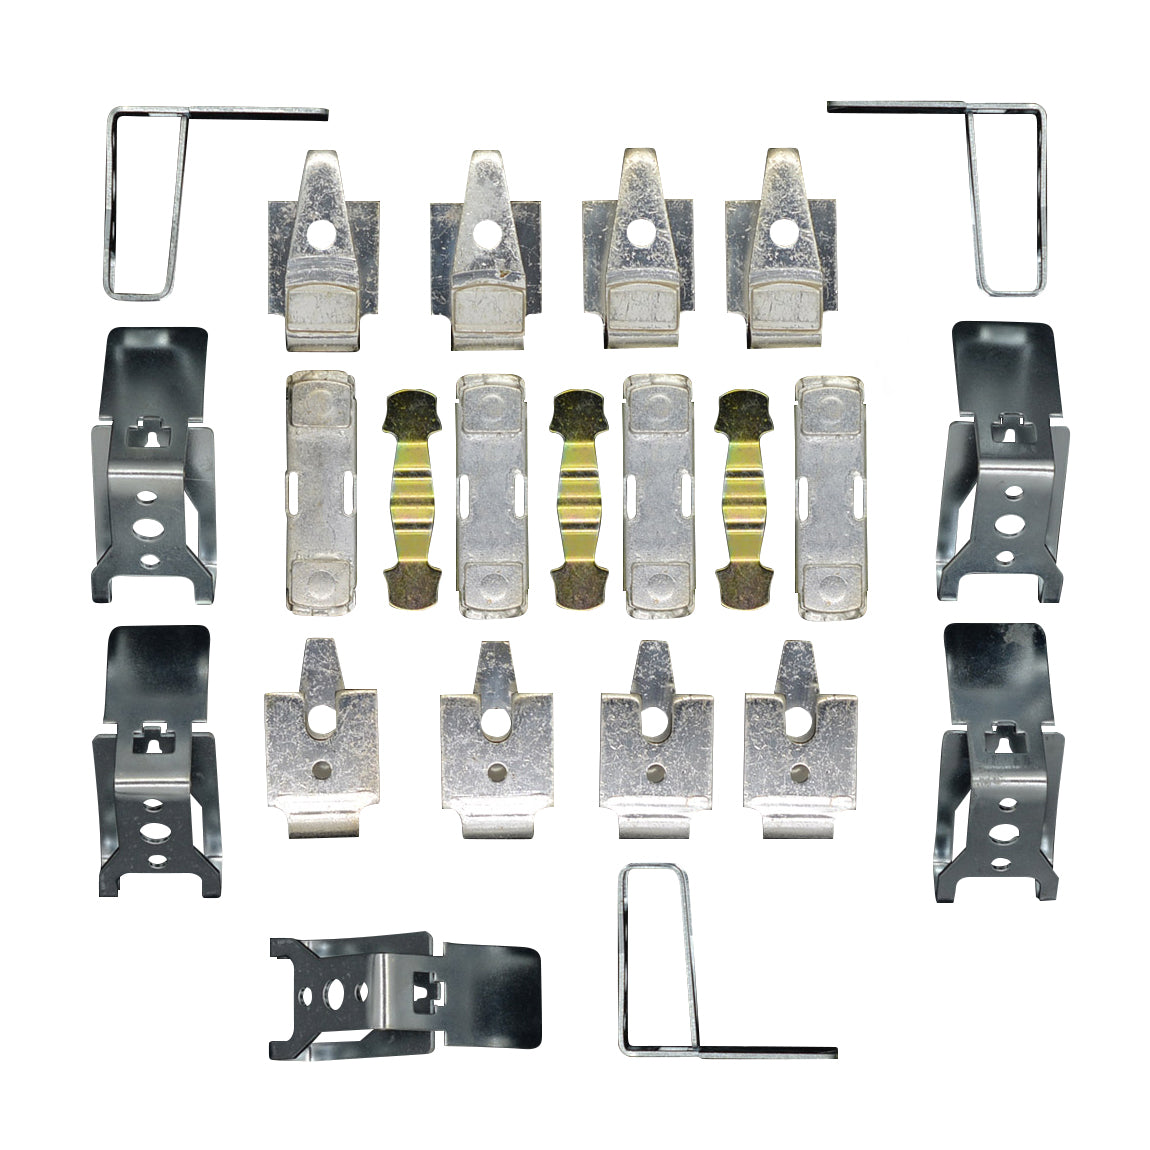 LC1F Contact kits LA5F630804 for the LC1F6304 contactor